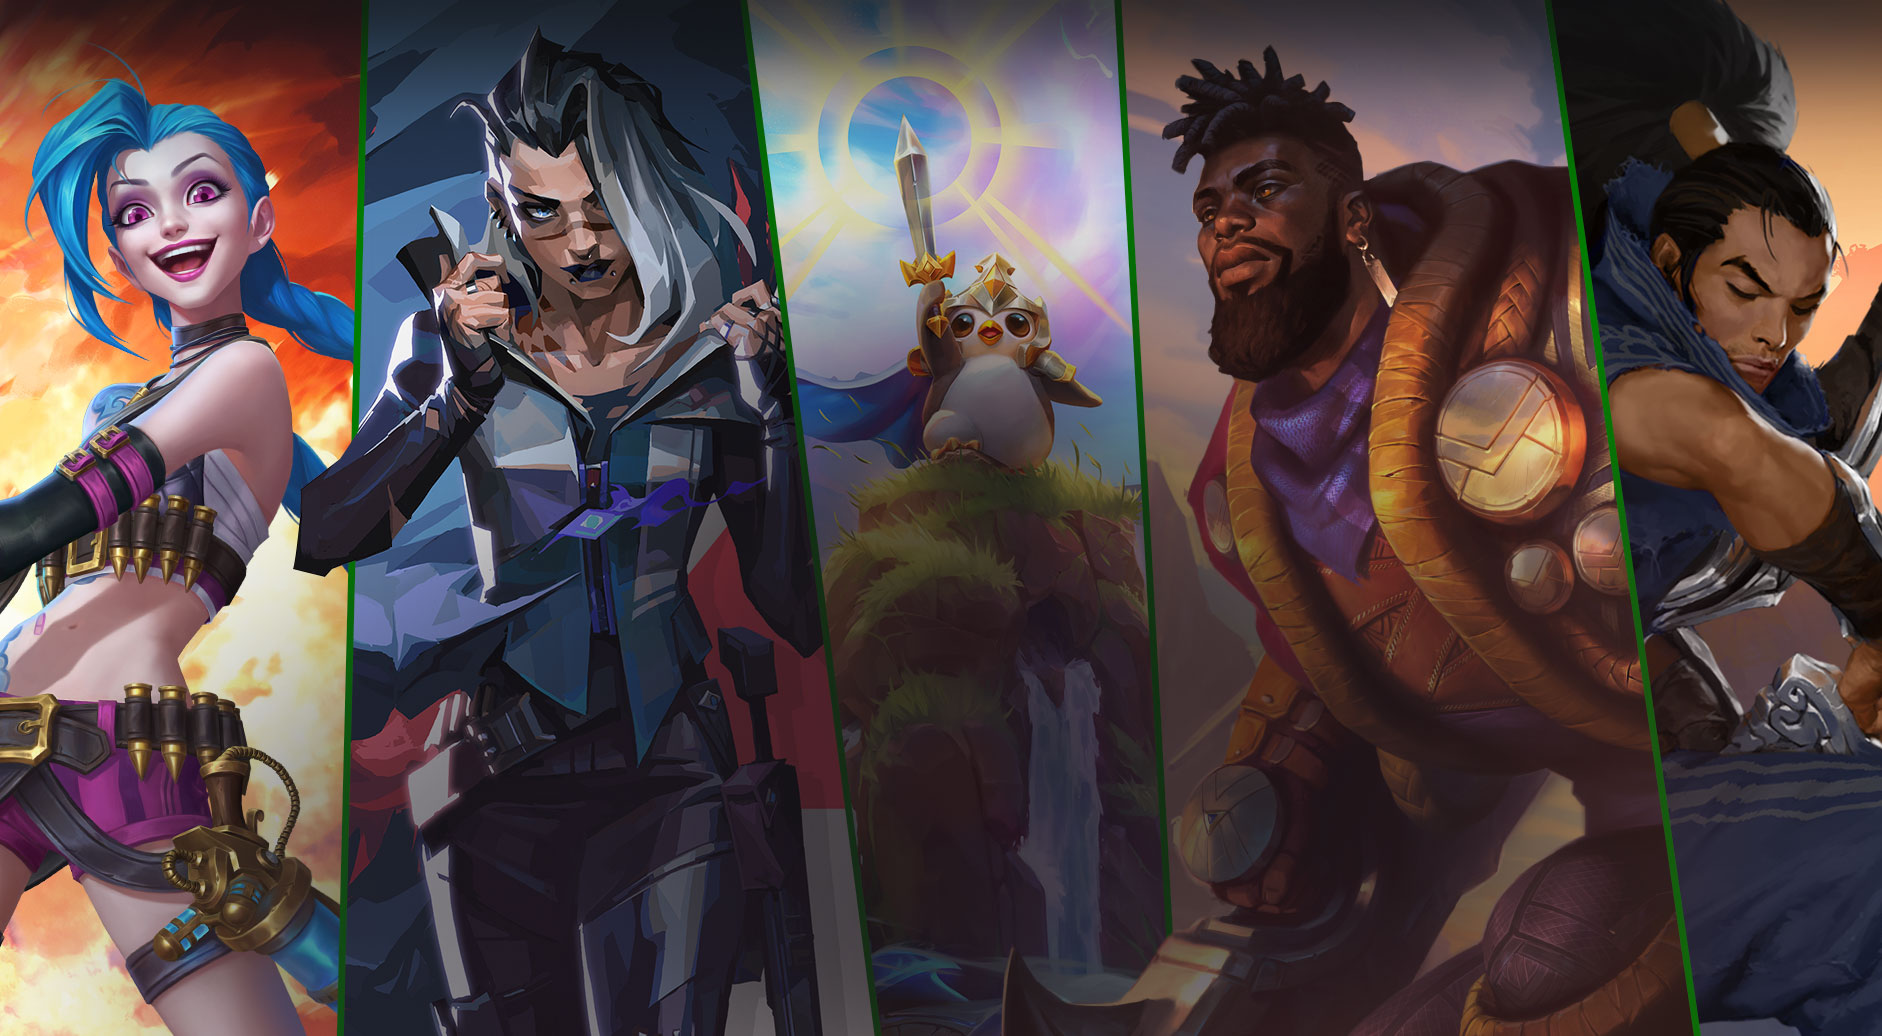 A collection of in-game characters from Riot Games published PC and mobile games.